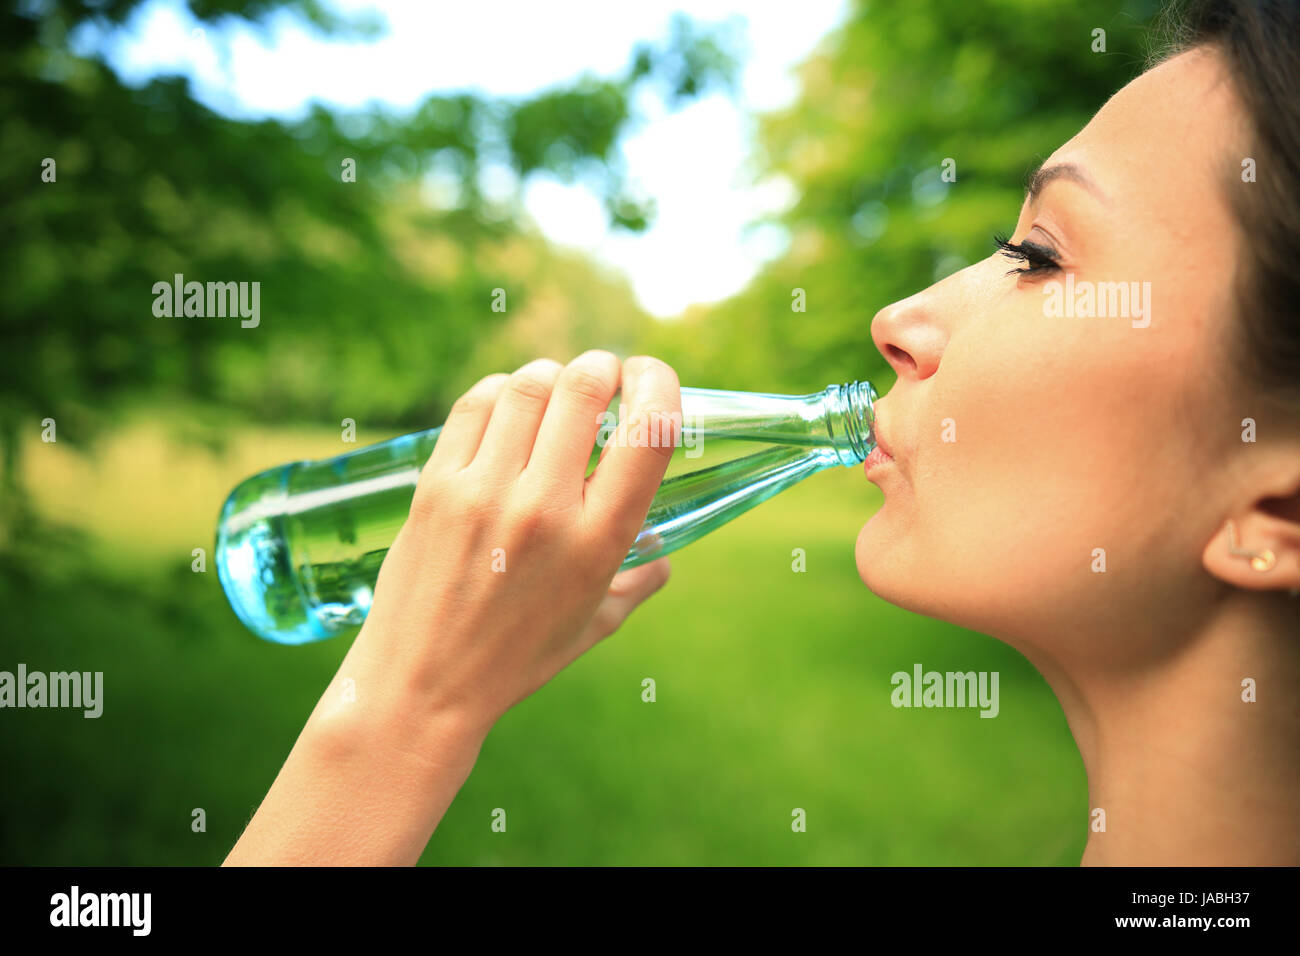 Girl drinks water close-up. Young woman with bottle of fitness water in green park. Healthy lifestyle backdrop. Stock Photo